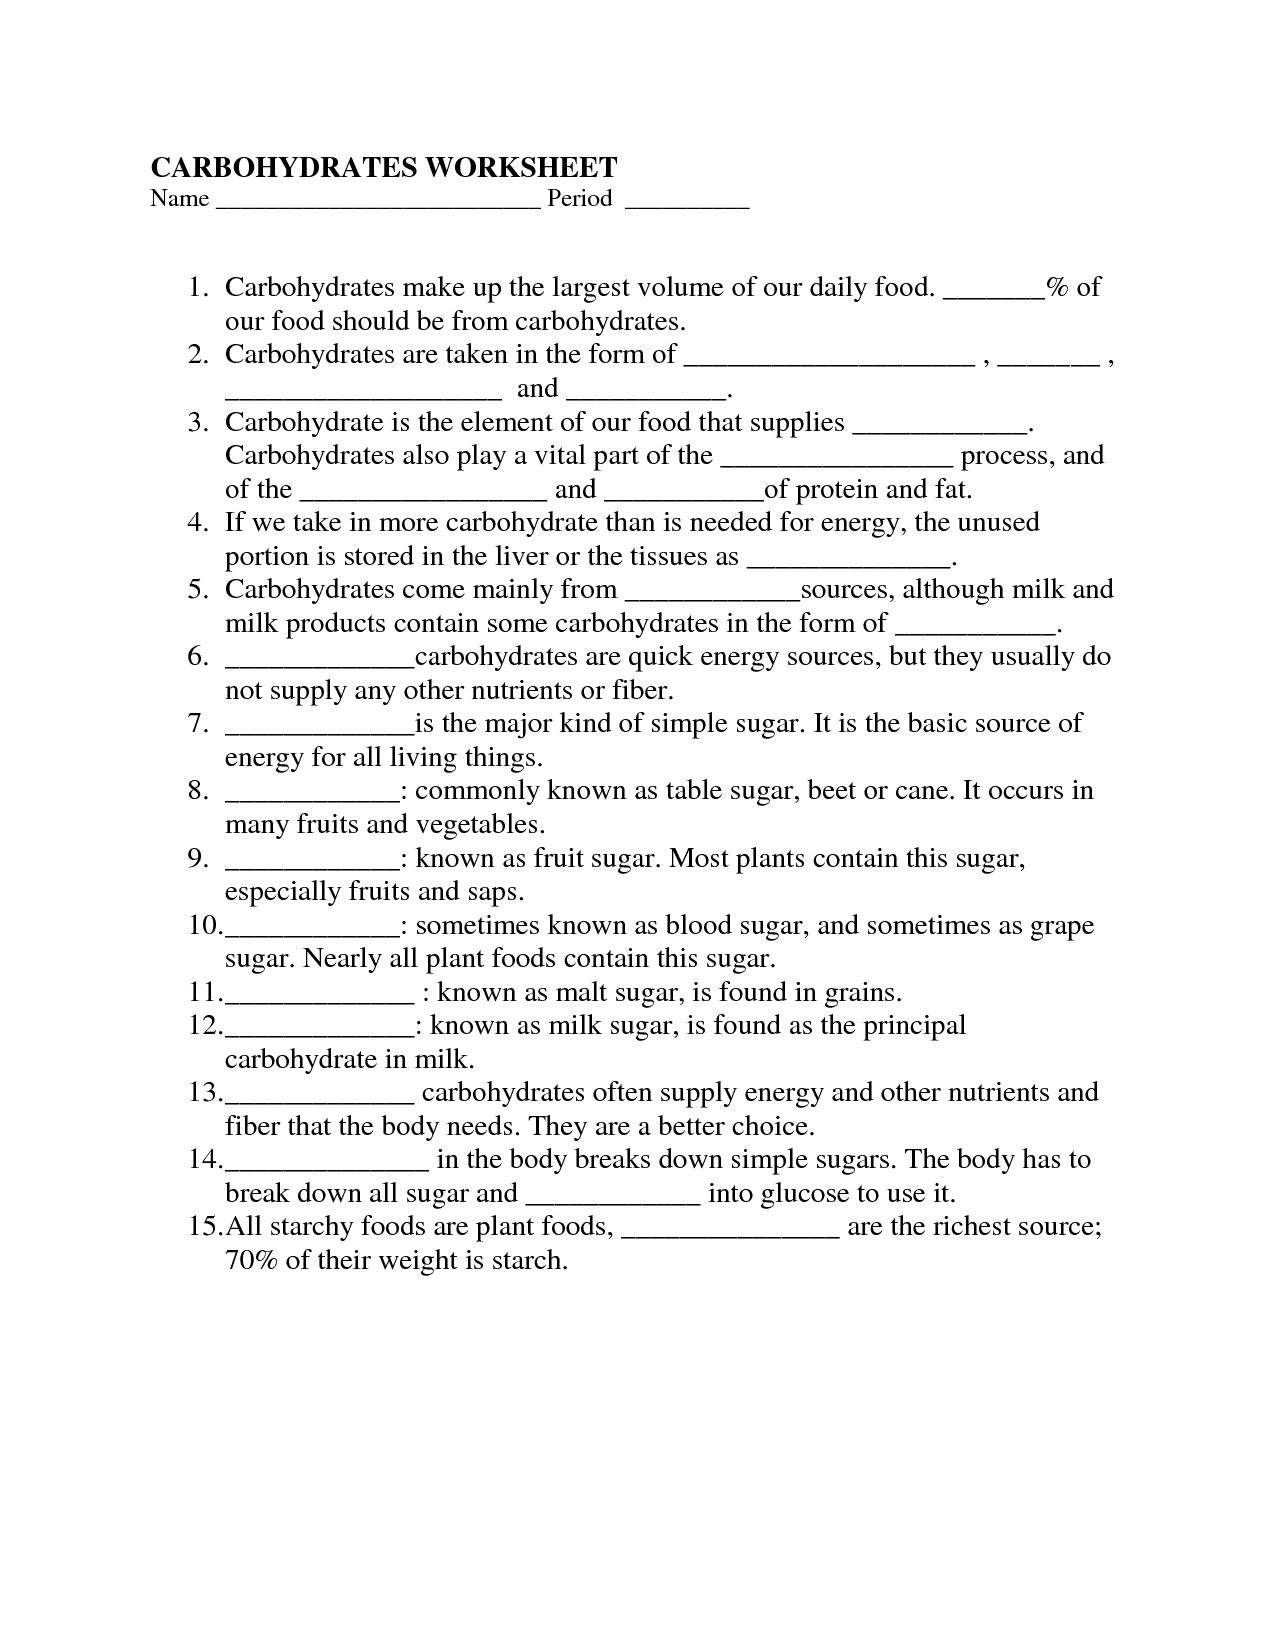 14-best-images-of-carbohydrates-proteins-lipids-fats-worksheet-carbohydrates-food-coloring